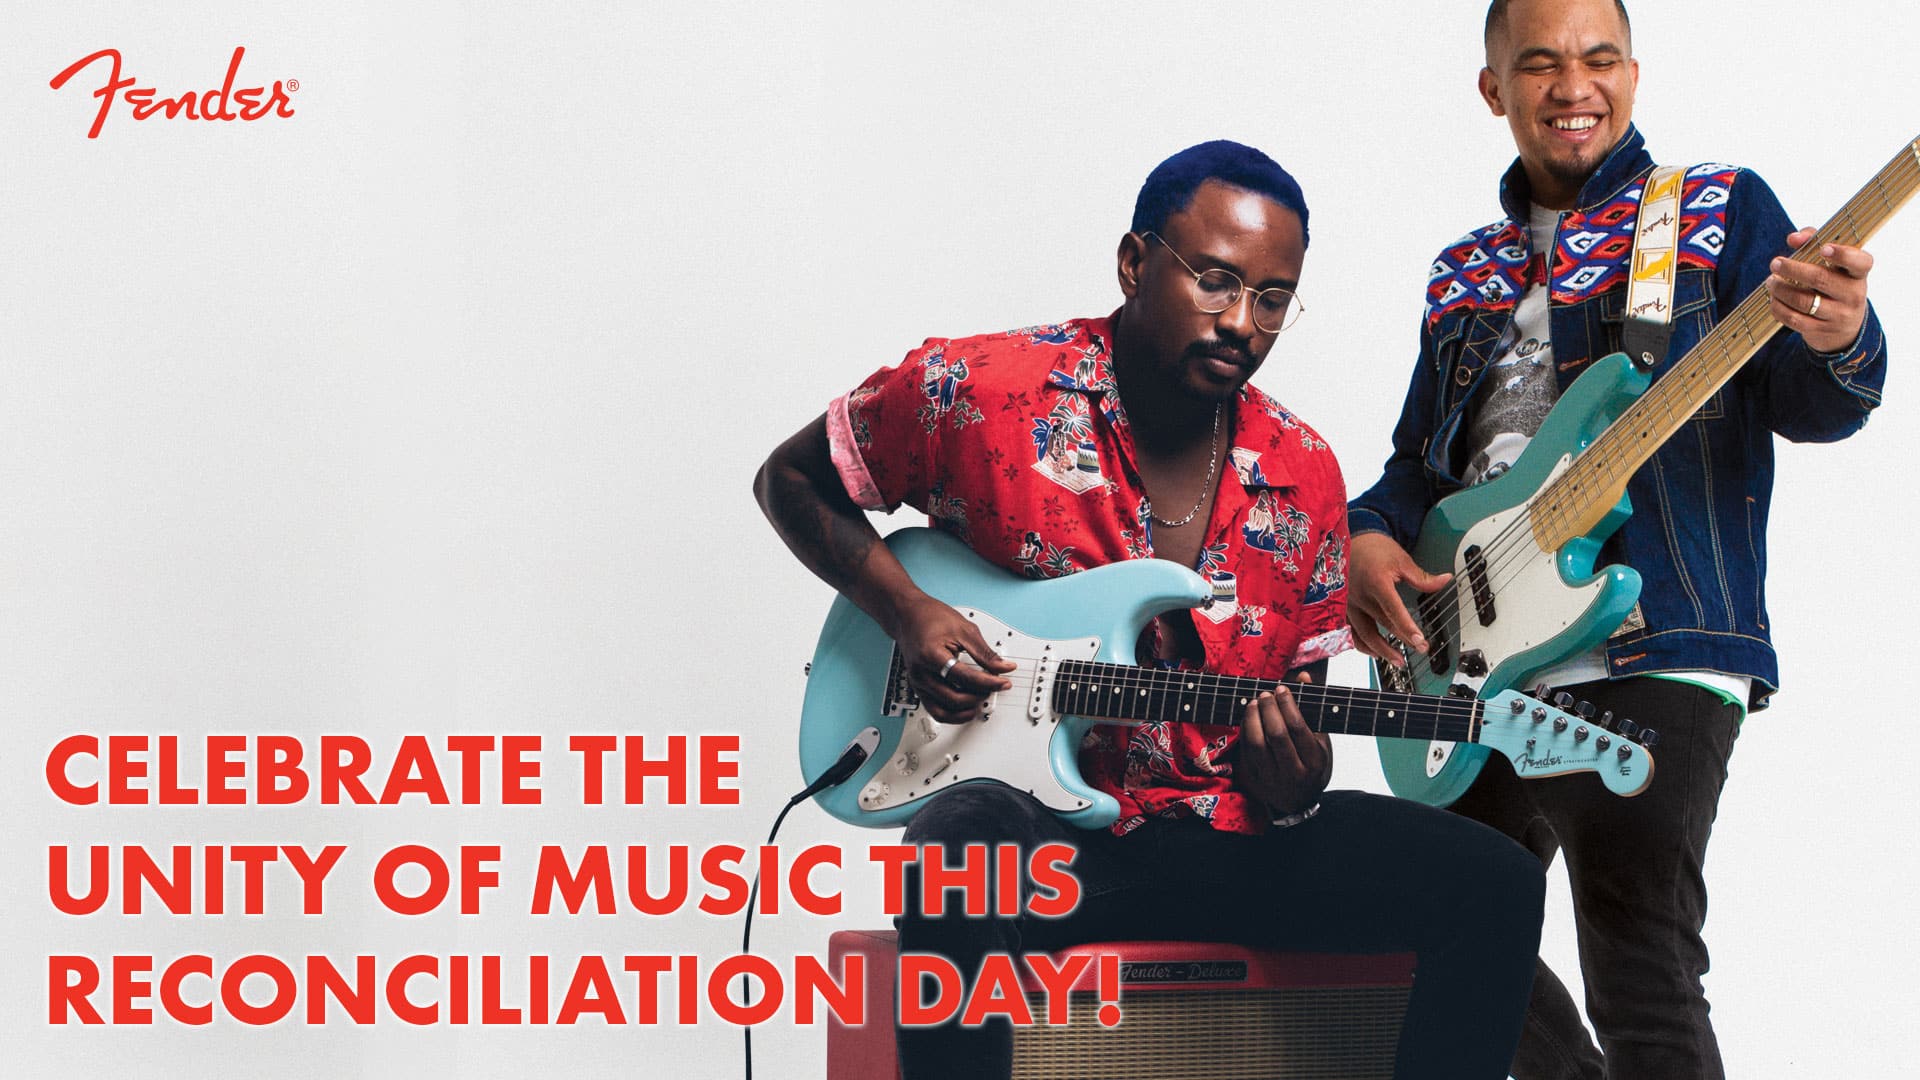 Celebrate the Unity of Music this Reconciliation Day